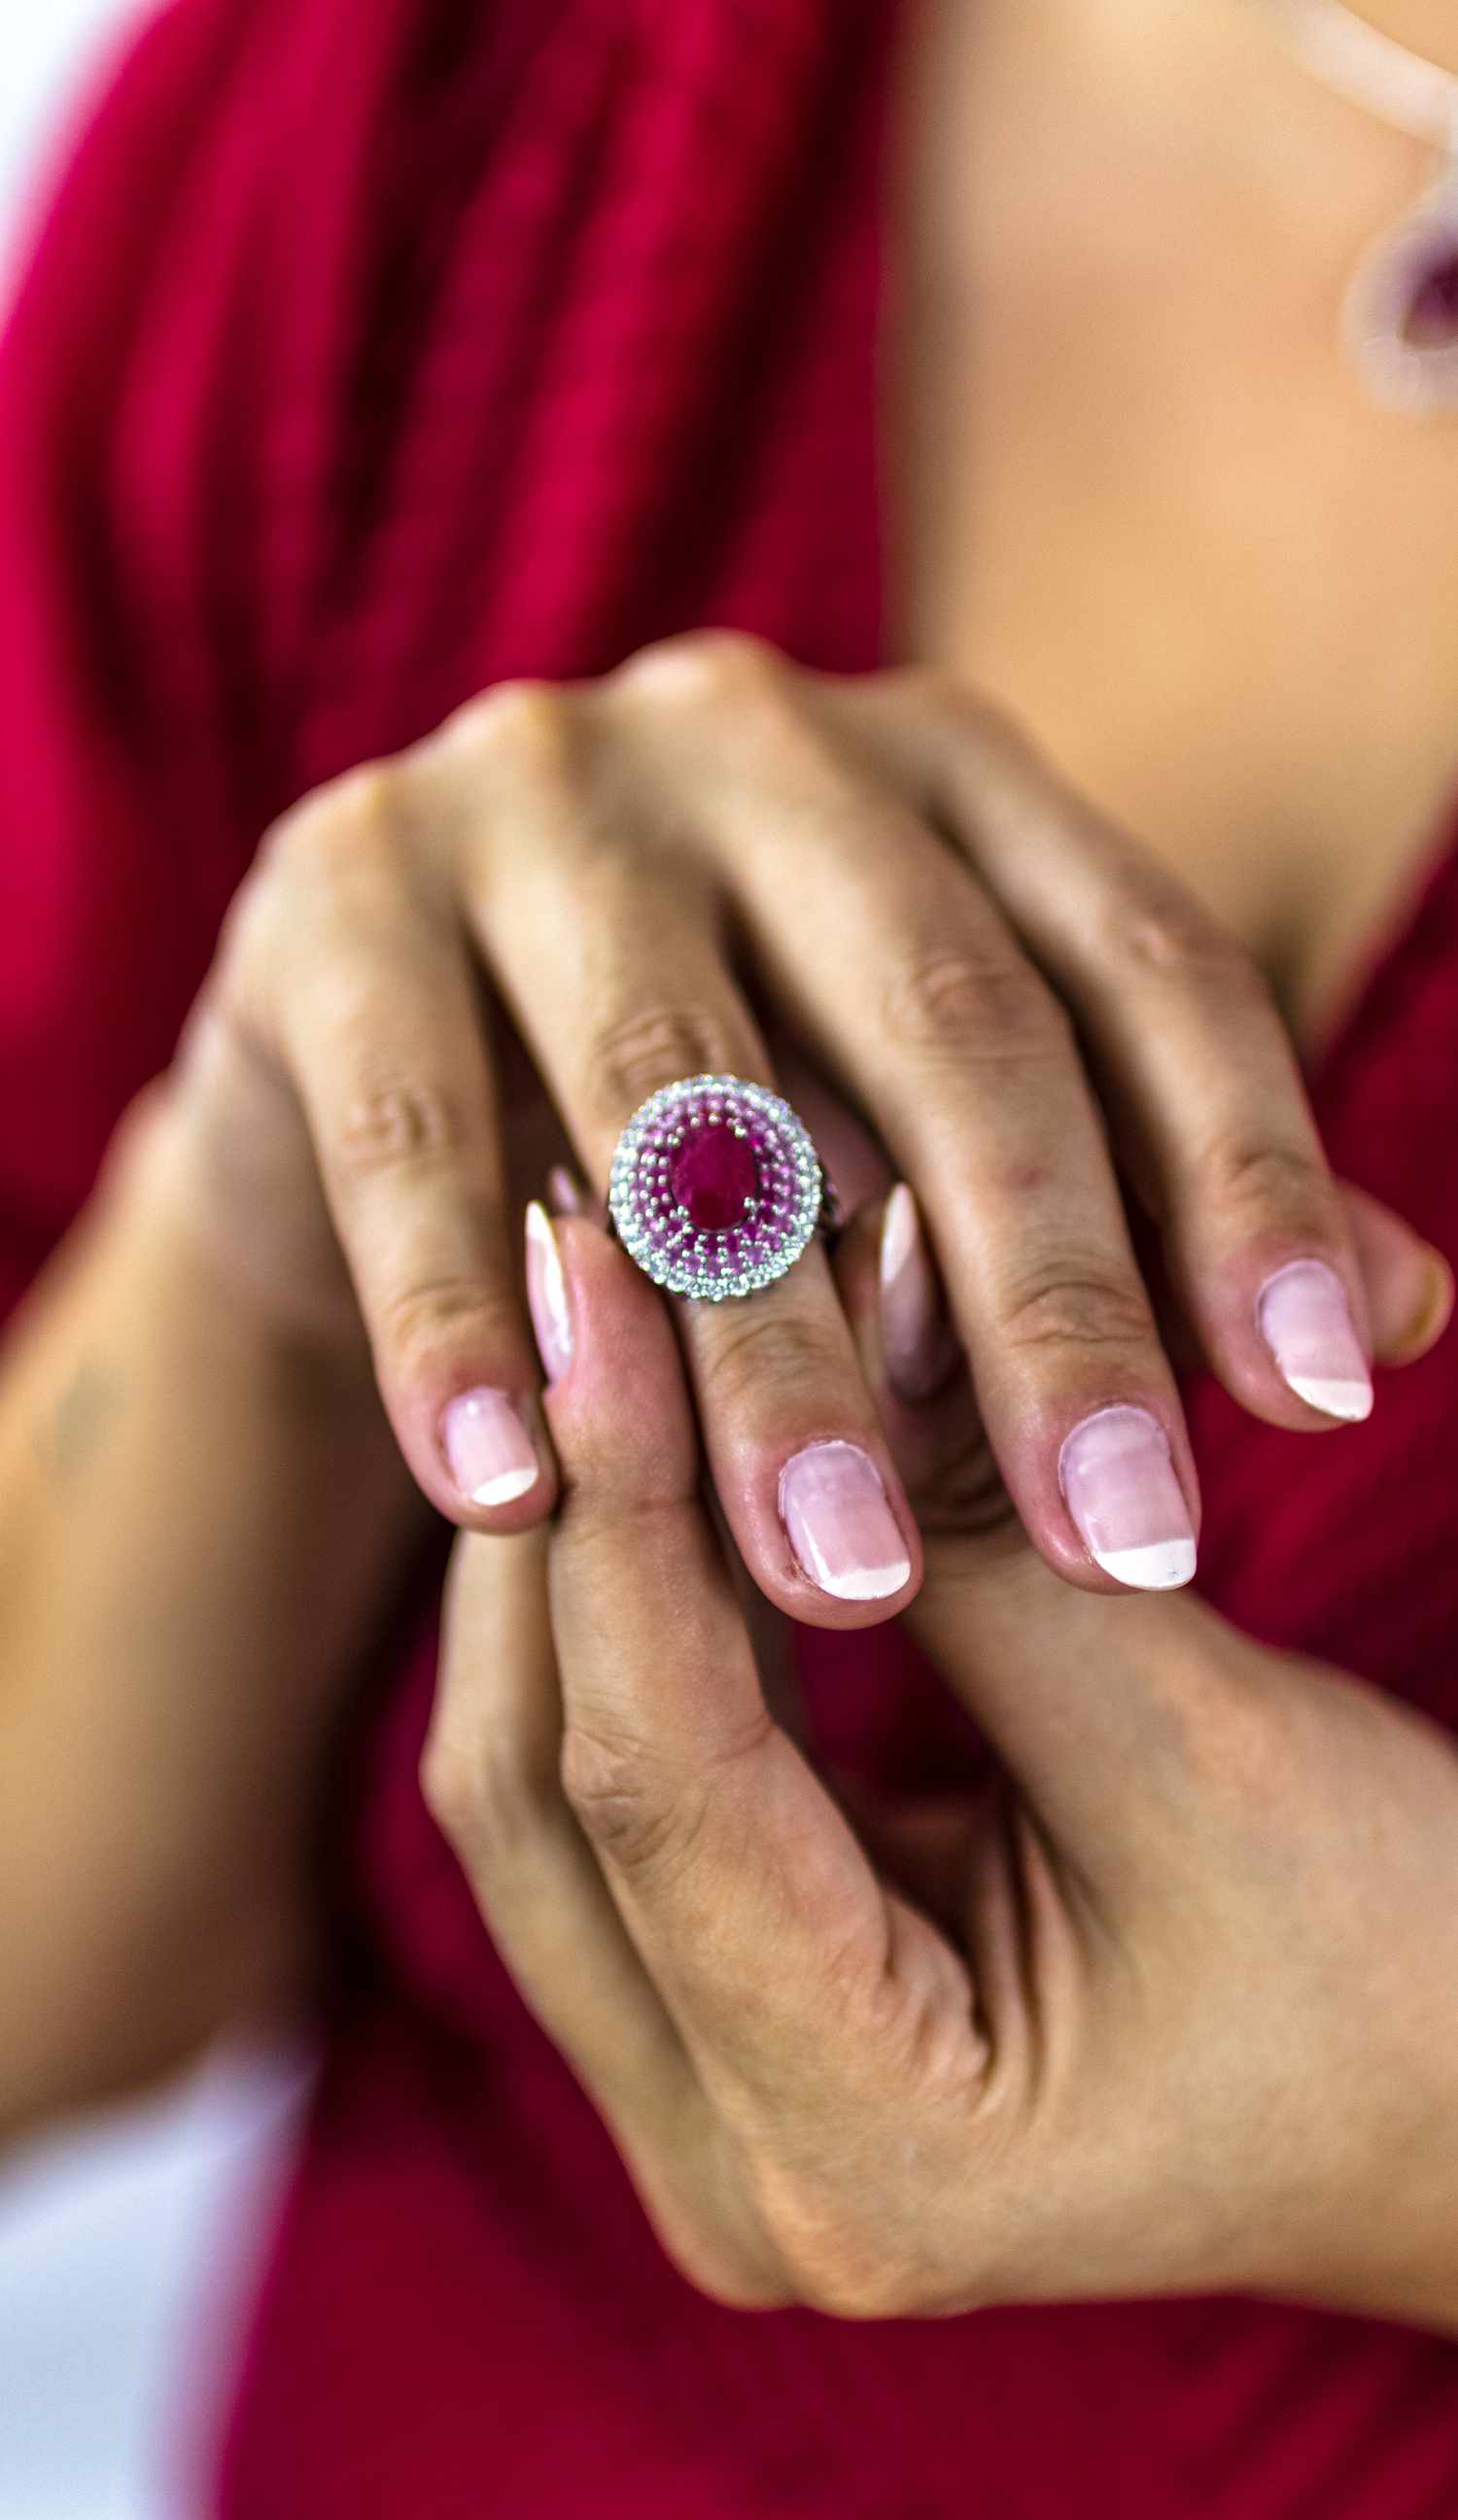 A woman putting a ruby and diamond ring on her ring finger